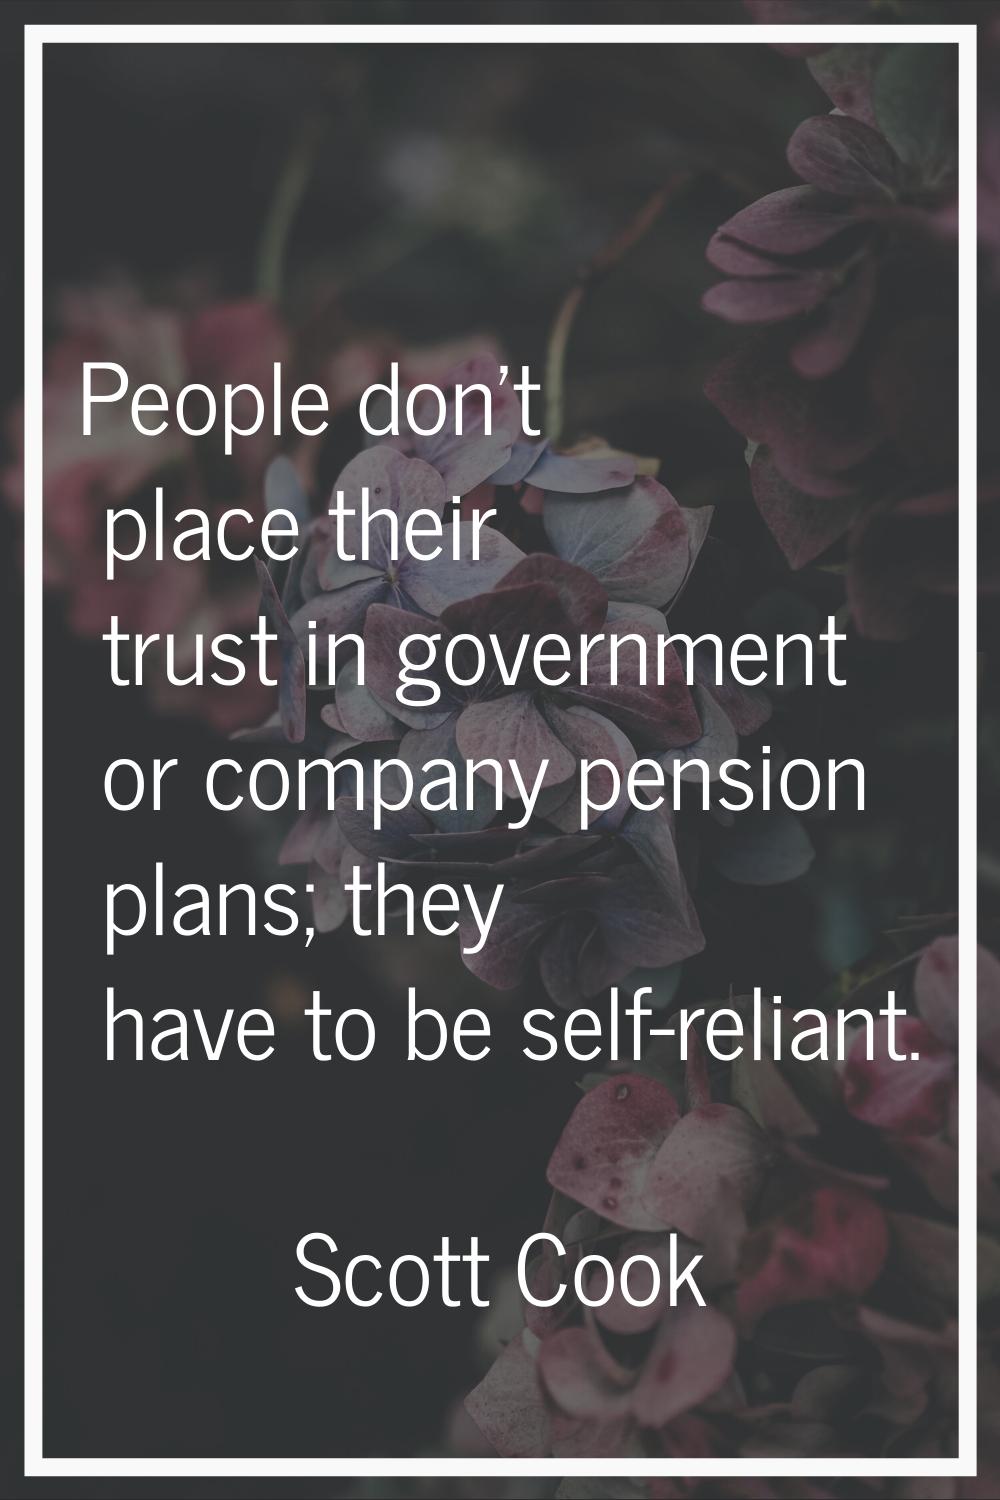 People don't place their trust in government or company pension plans; they have to be self-reliant